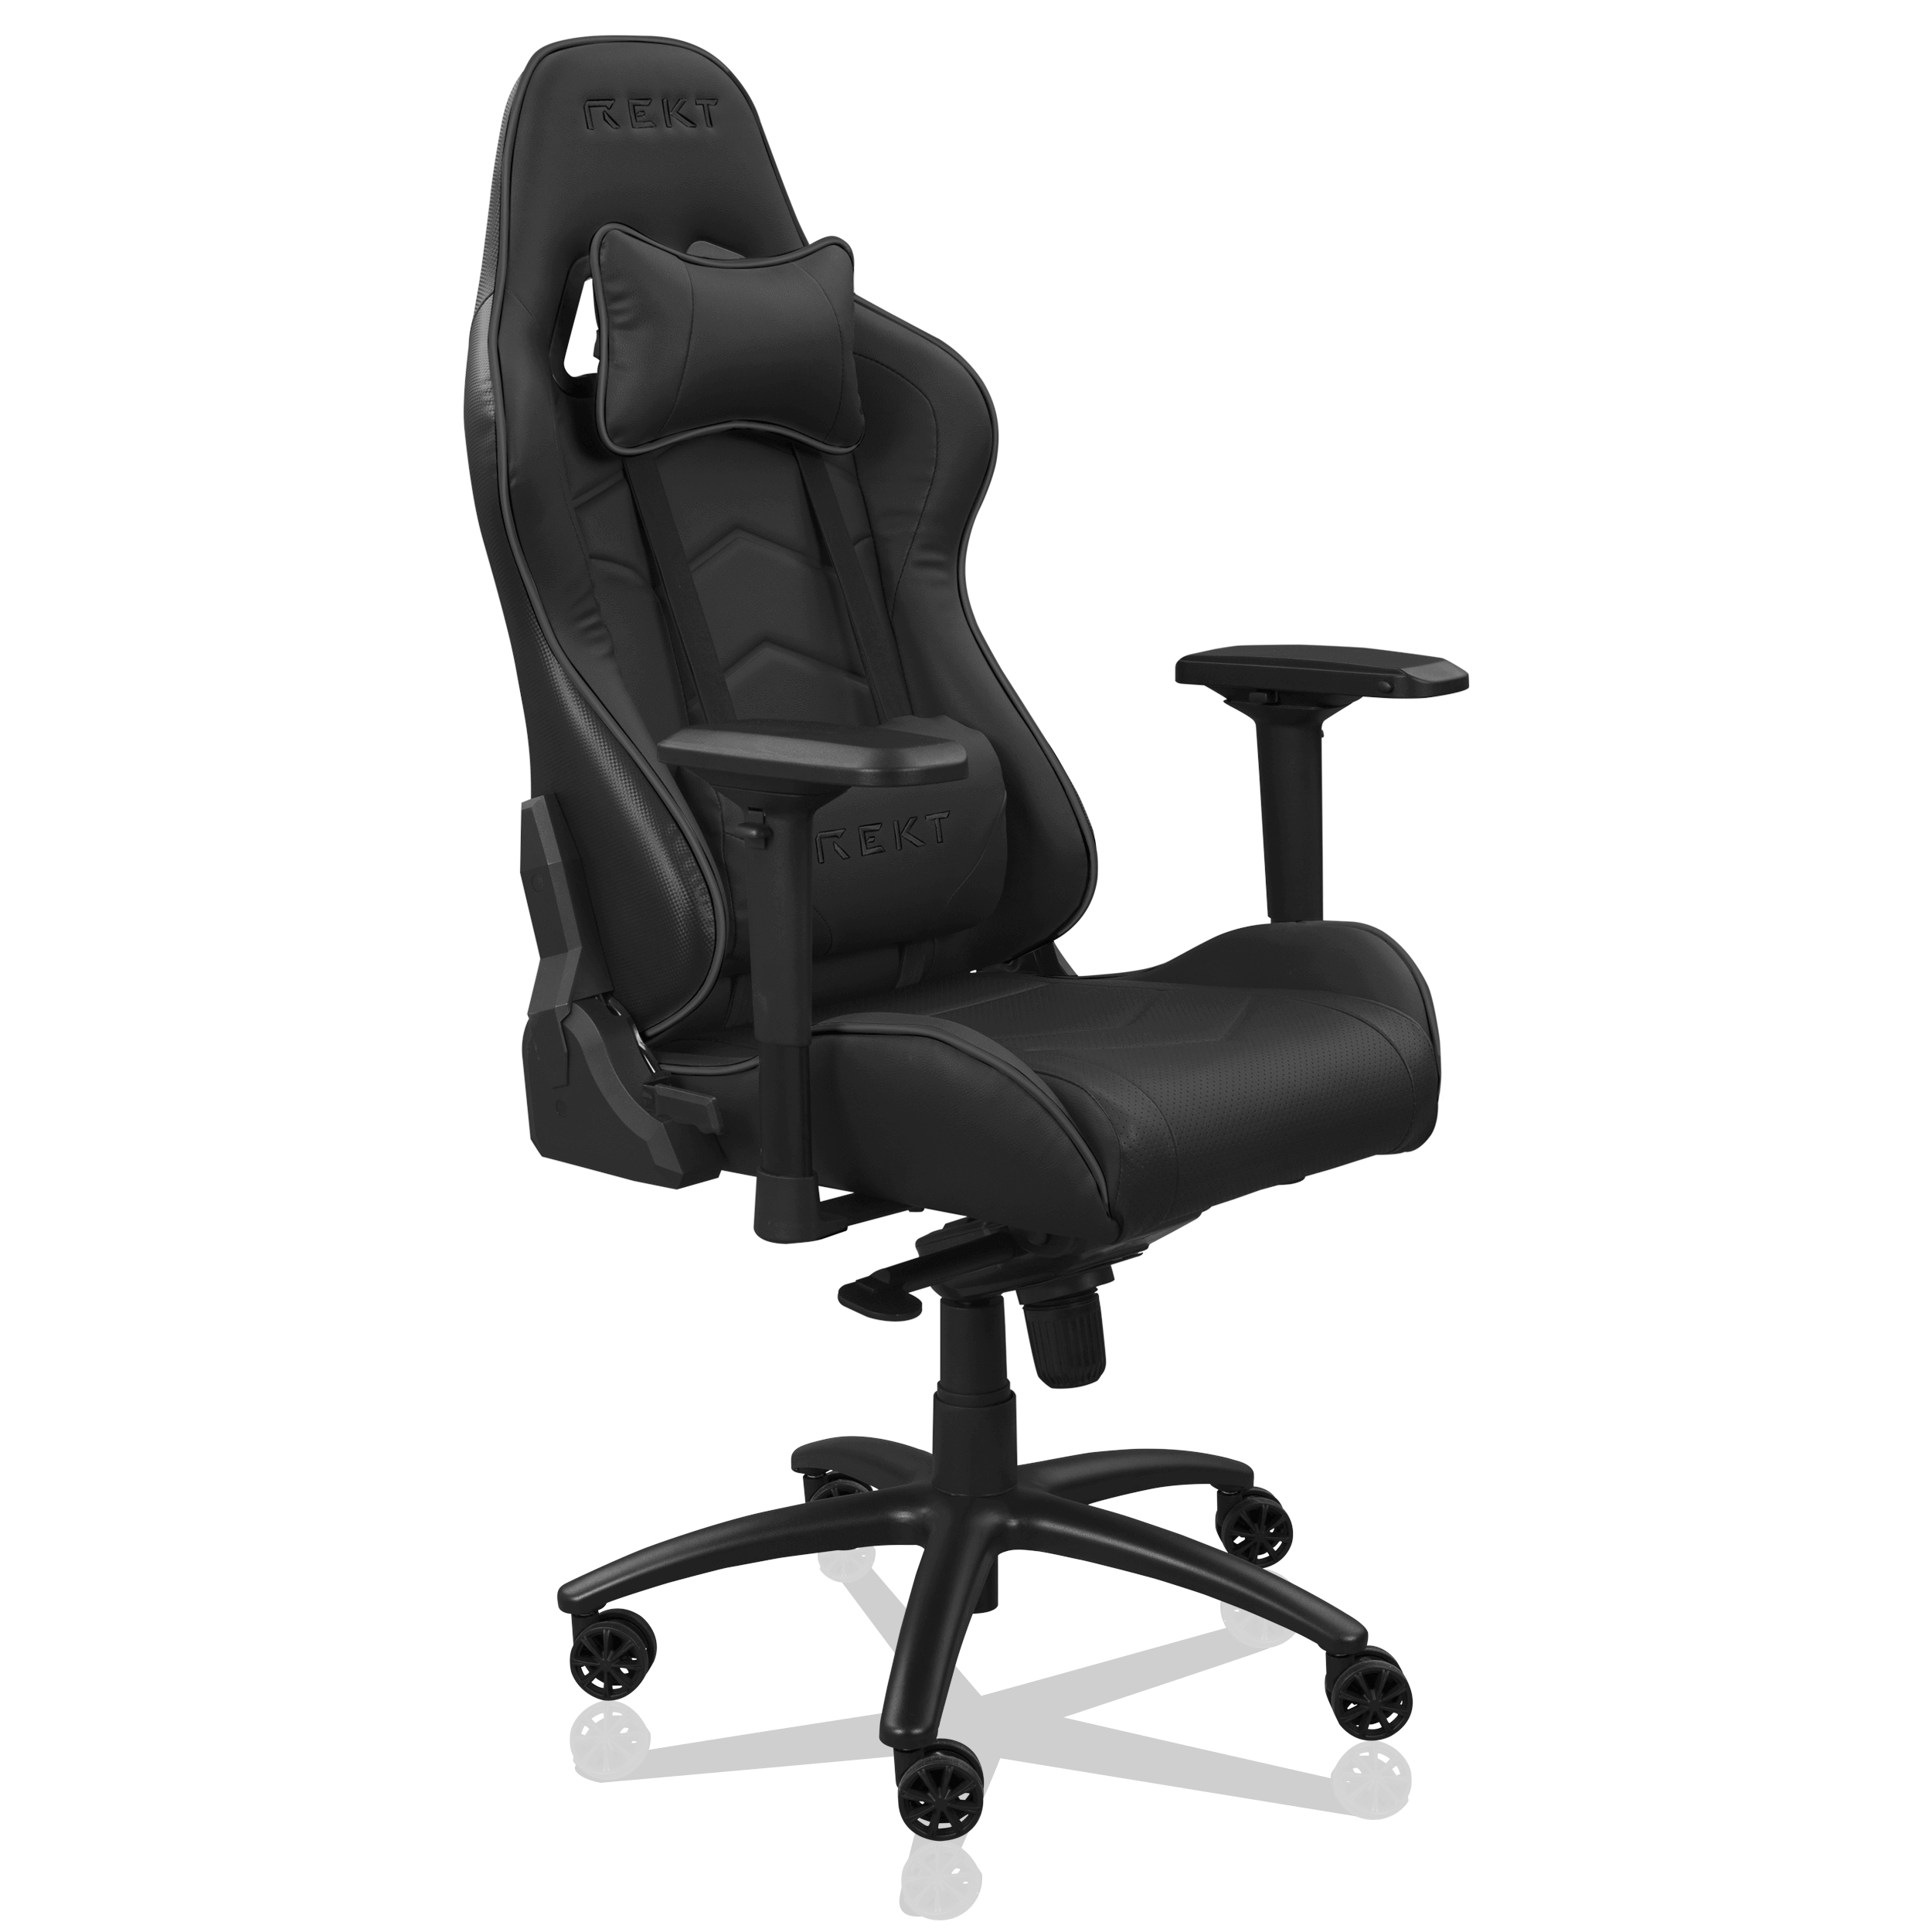 Chaise gaming Idom - noire –